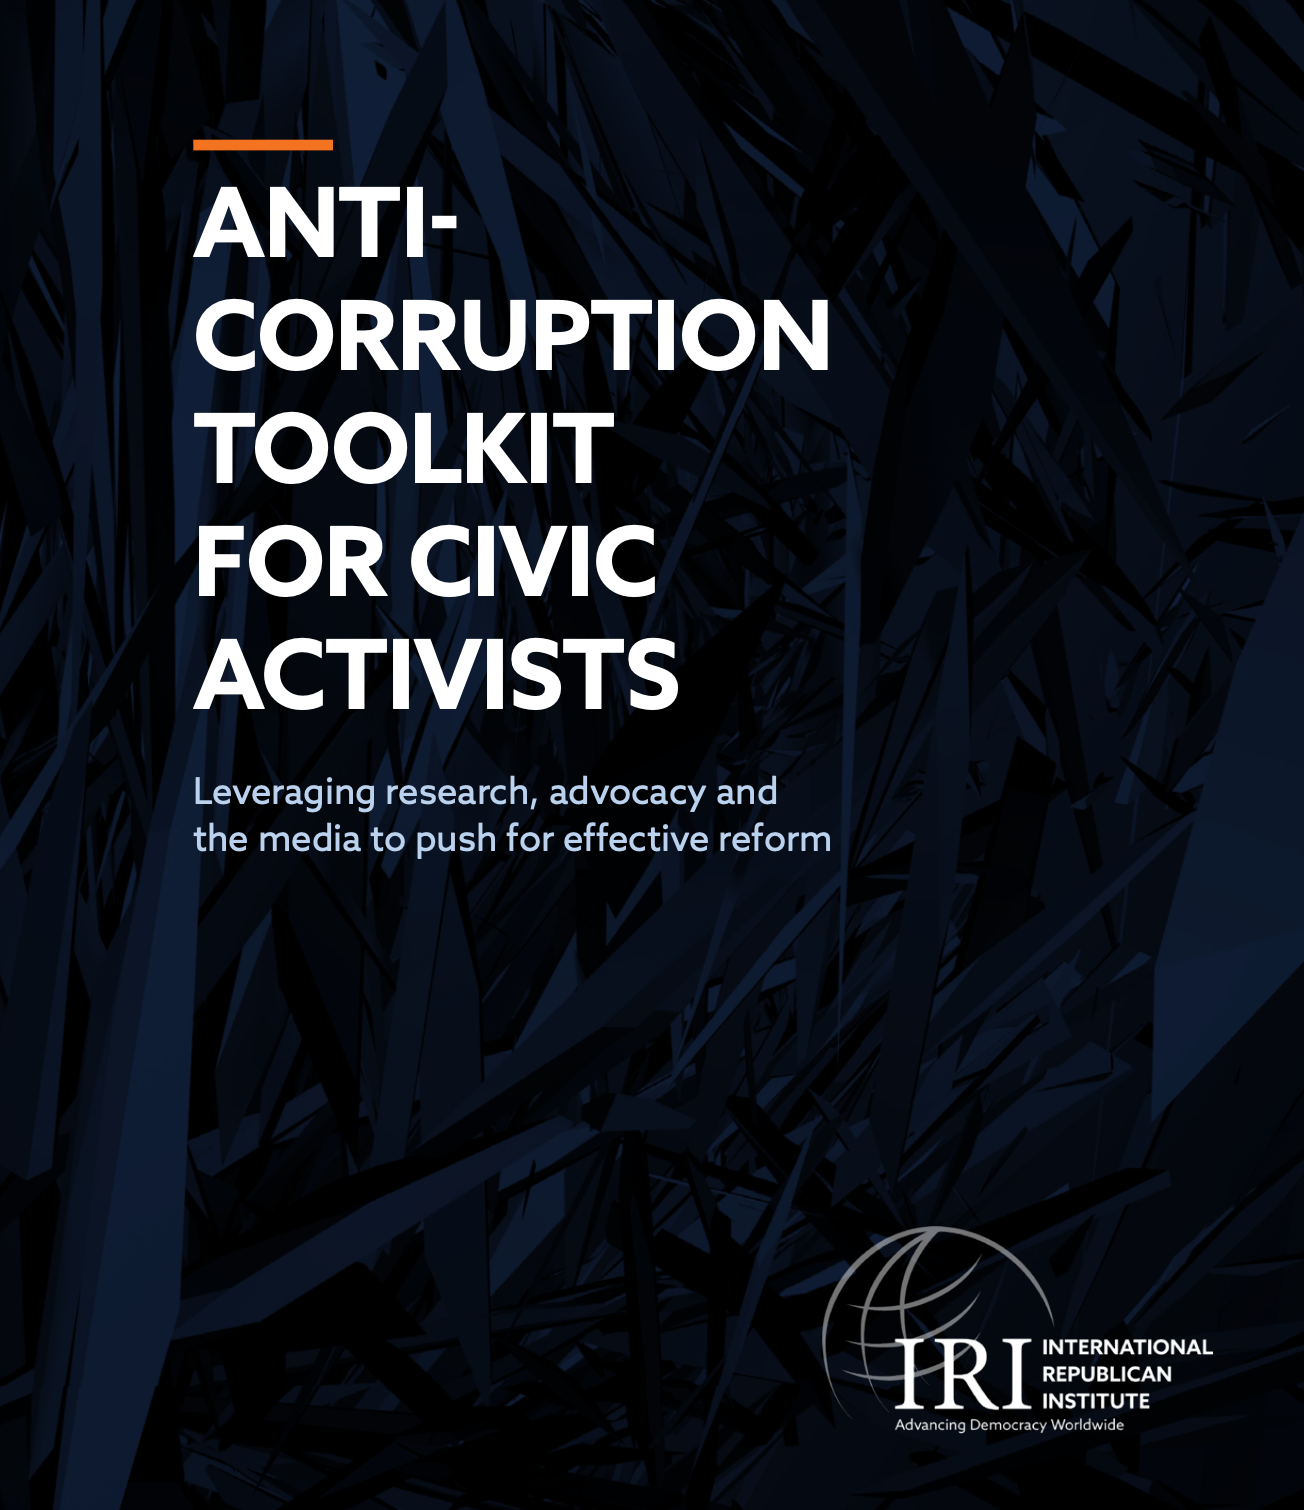 ANTICORRUPTION TOOLKIT FOR CIVIC ACTIVISTS: Leveraging research, advocacy and the media to push for effective reform